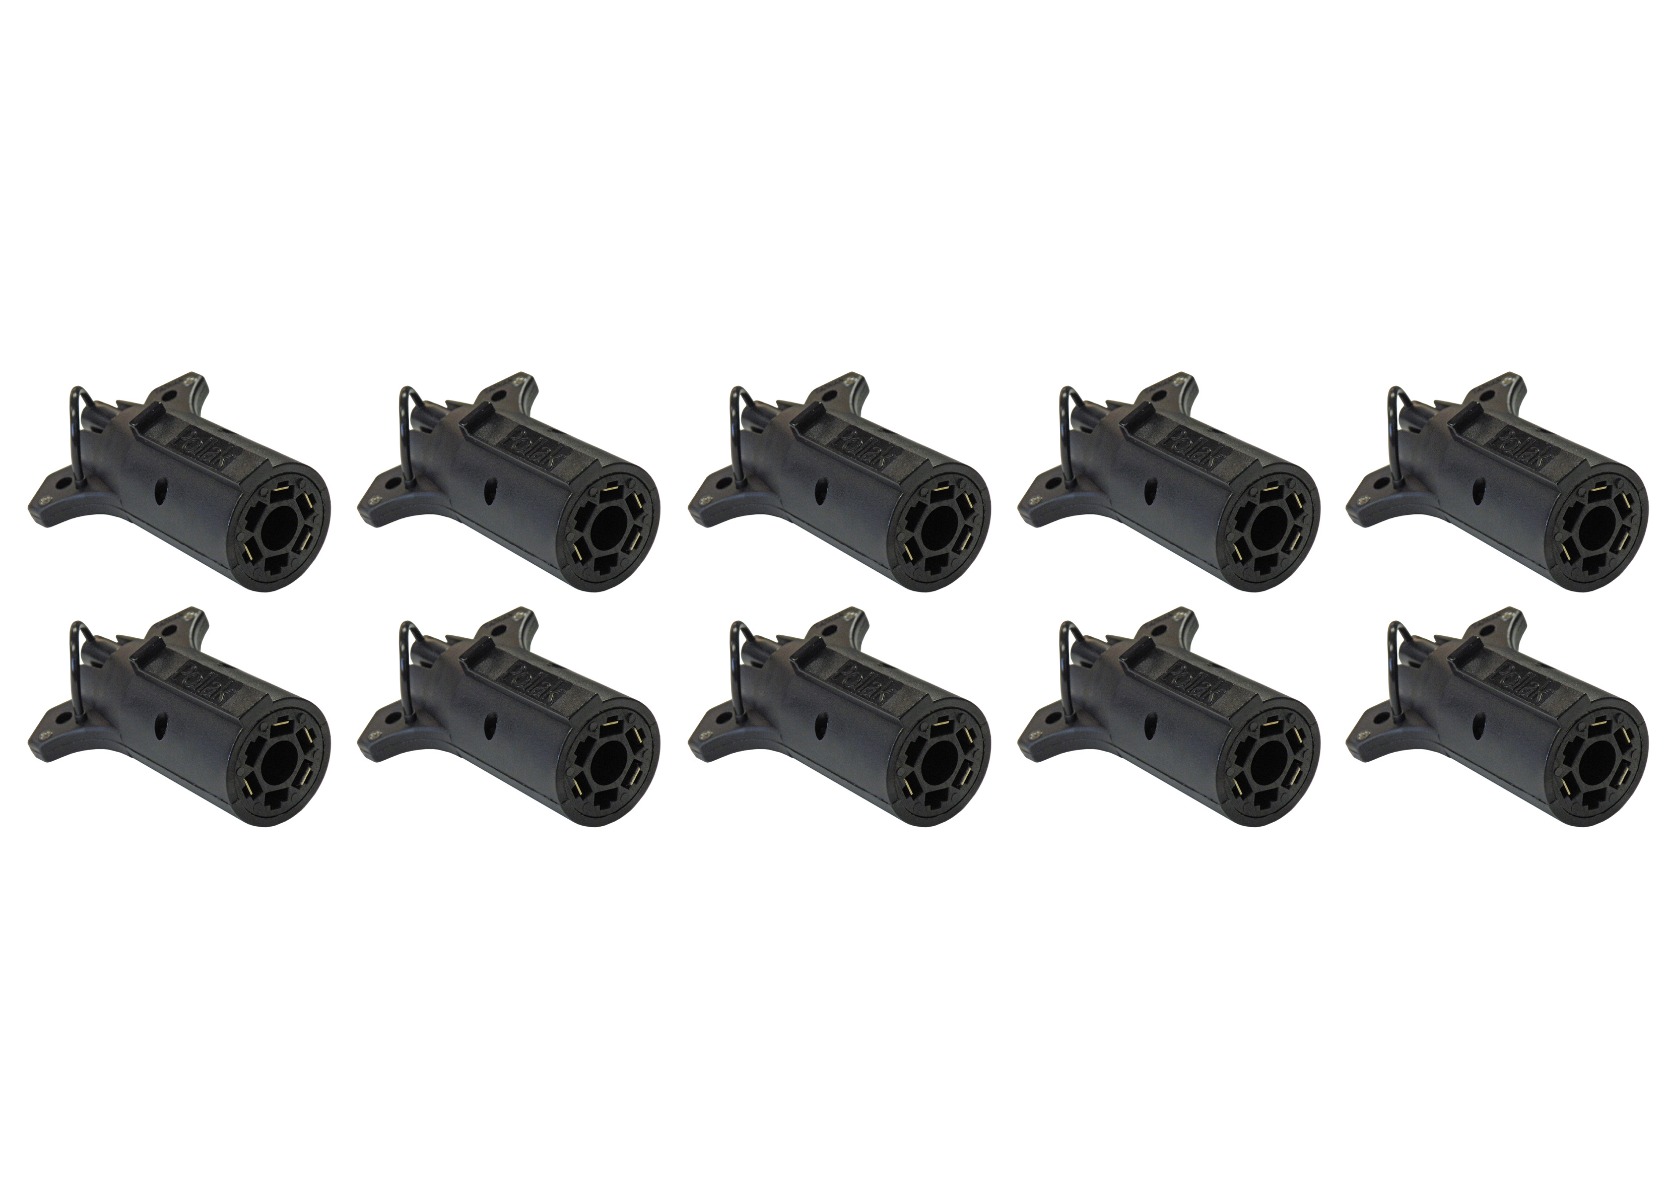 Wiring Adapter 7-Way With Flat Pins To 4-Flat - 10 Pack